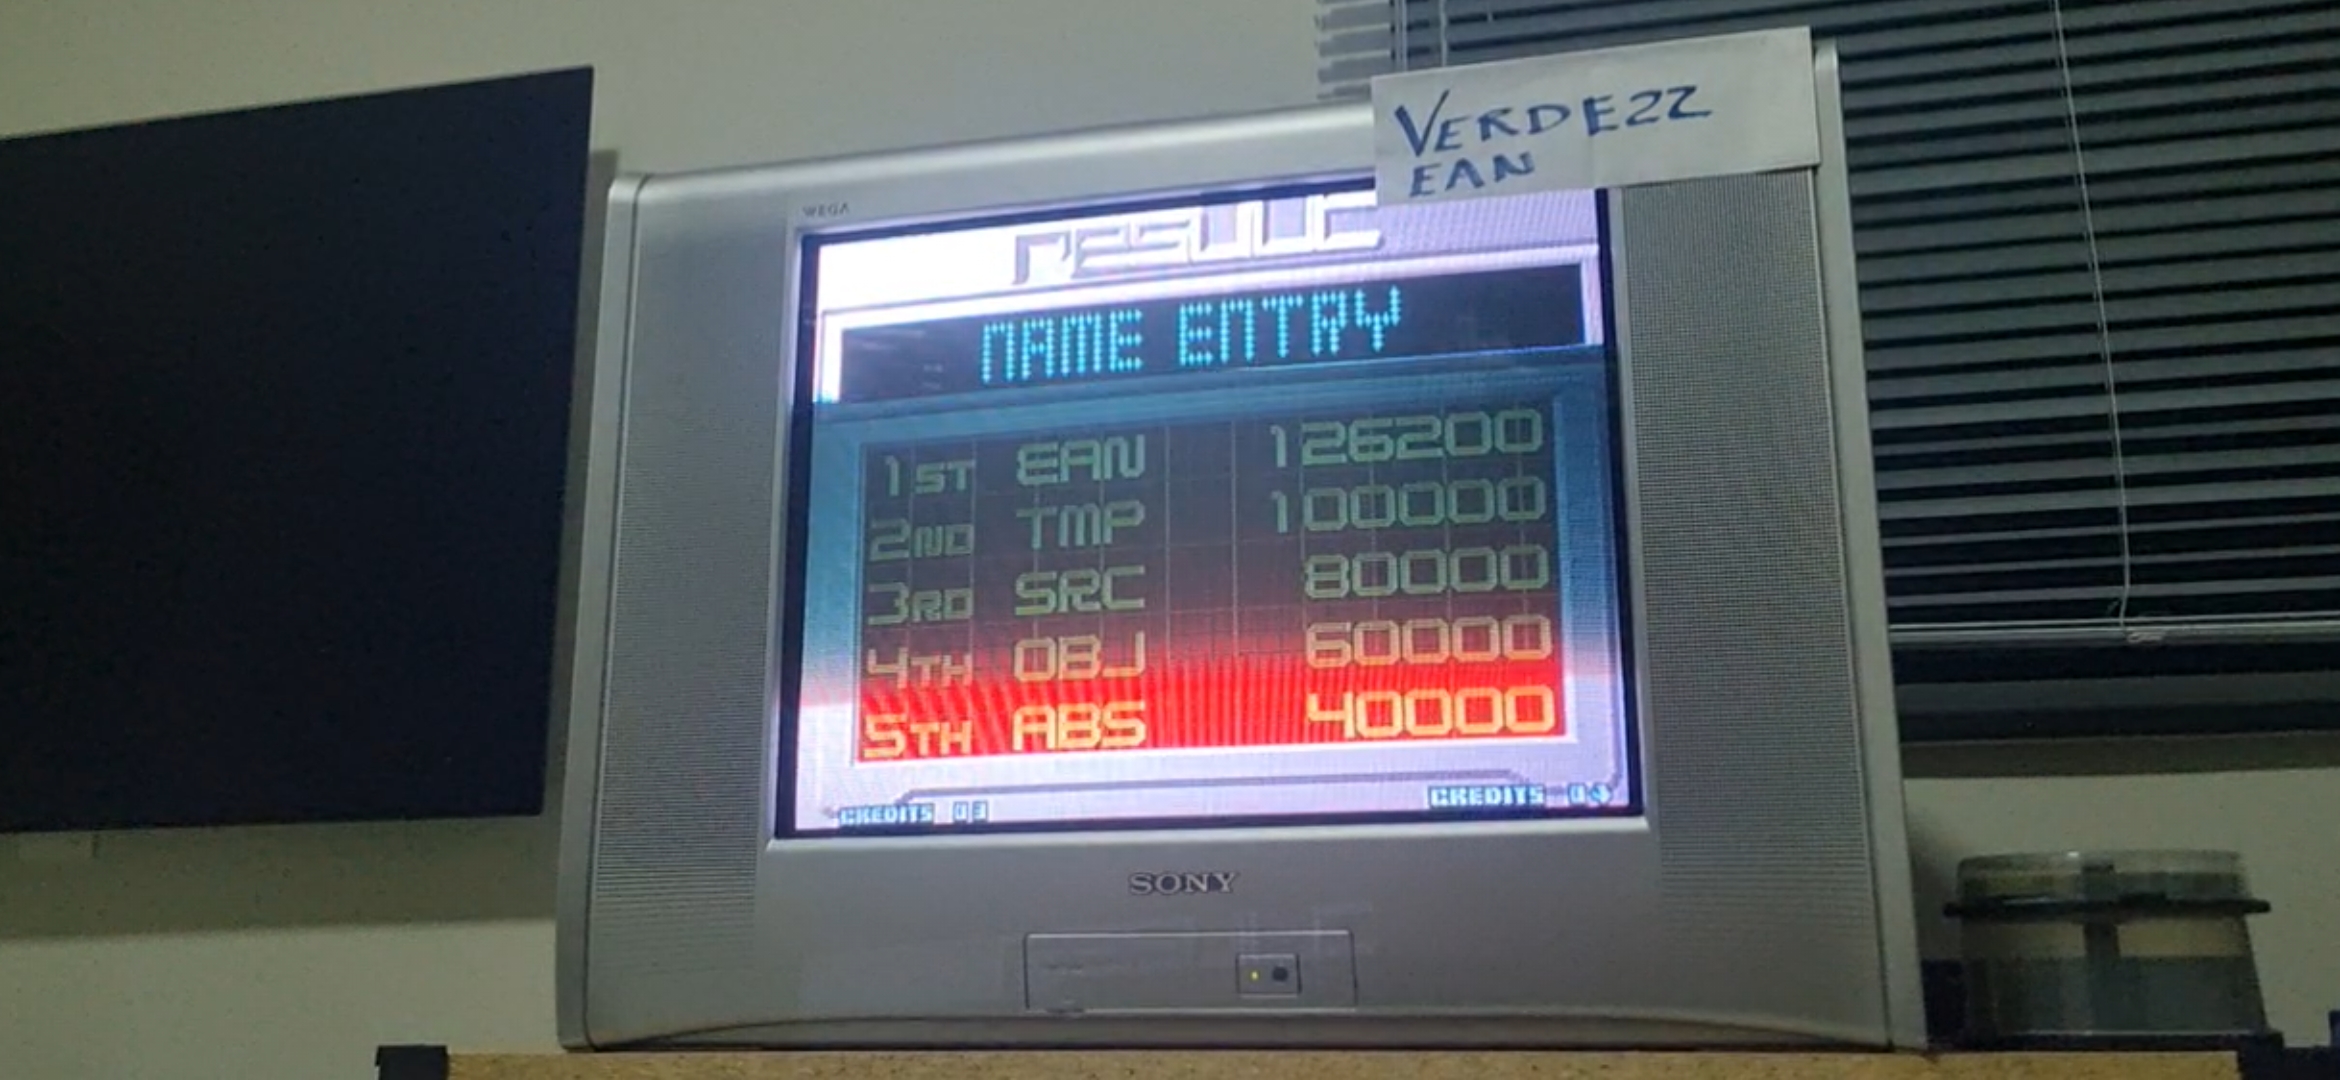 Verde22: King of Fighters 2002 (Neo Geo) 126,200 points on 2022-08-14 19:13:43